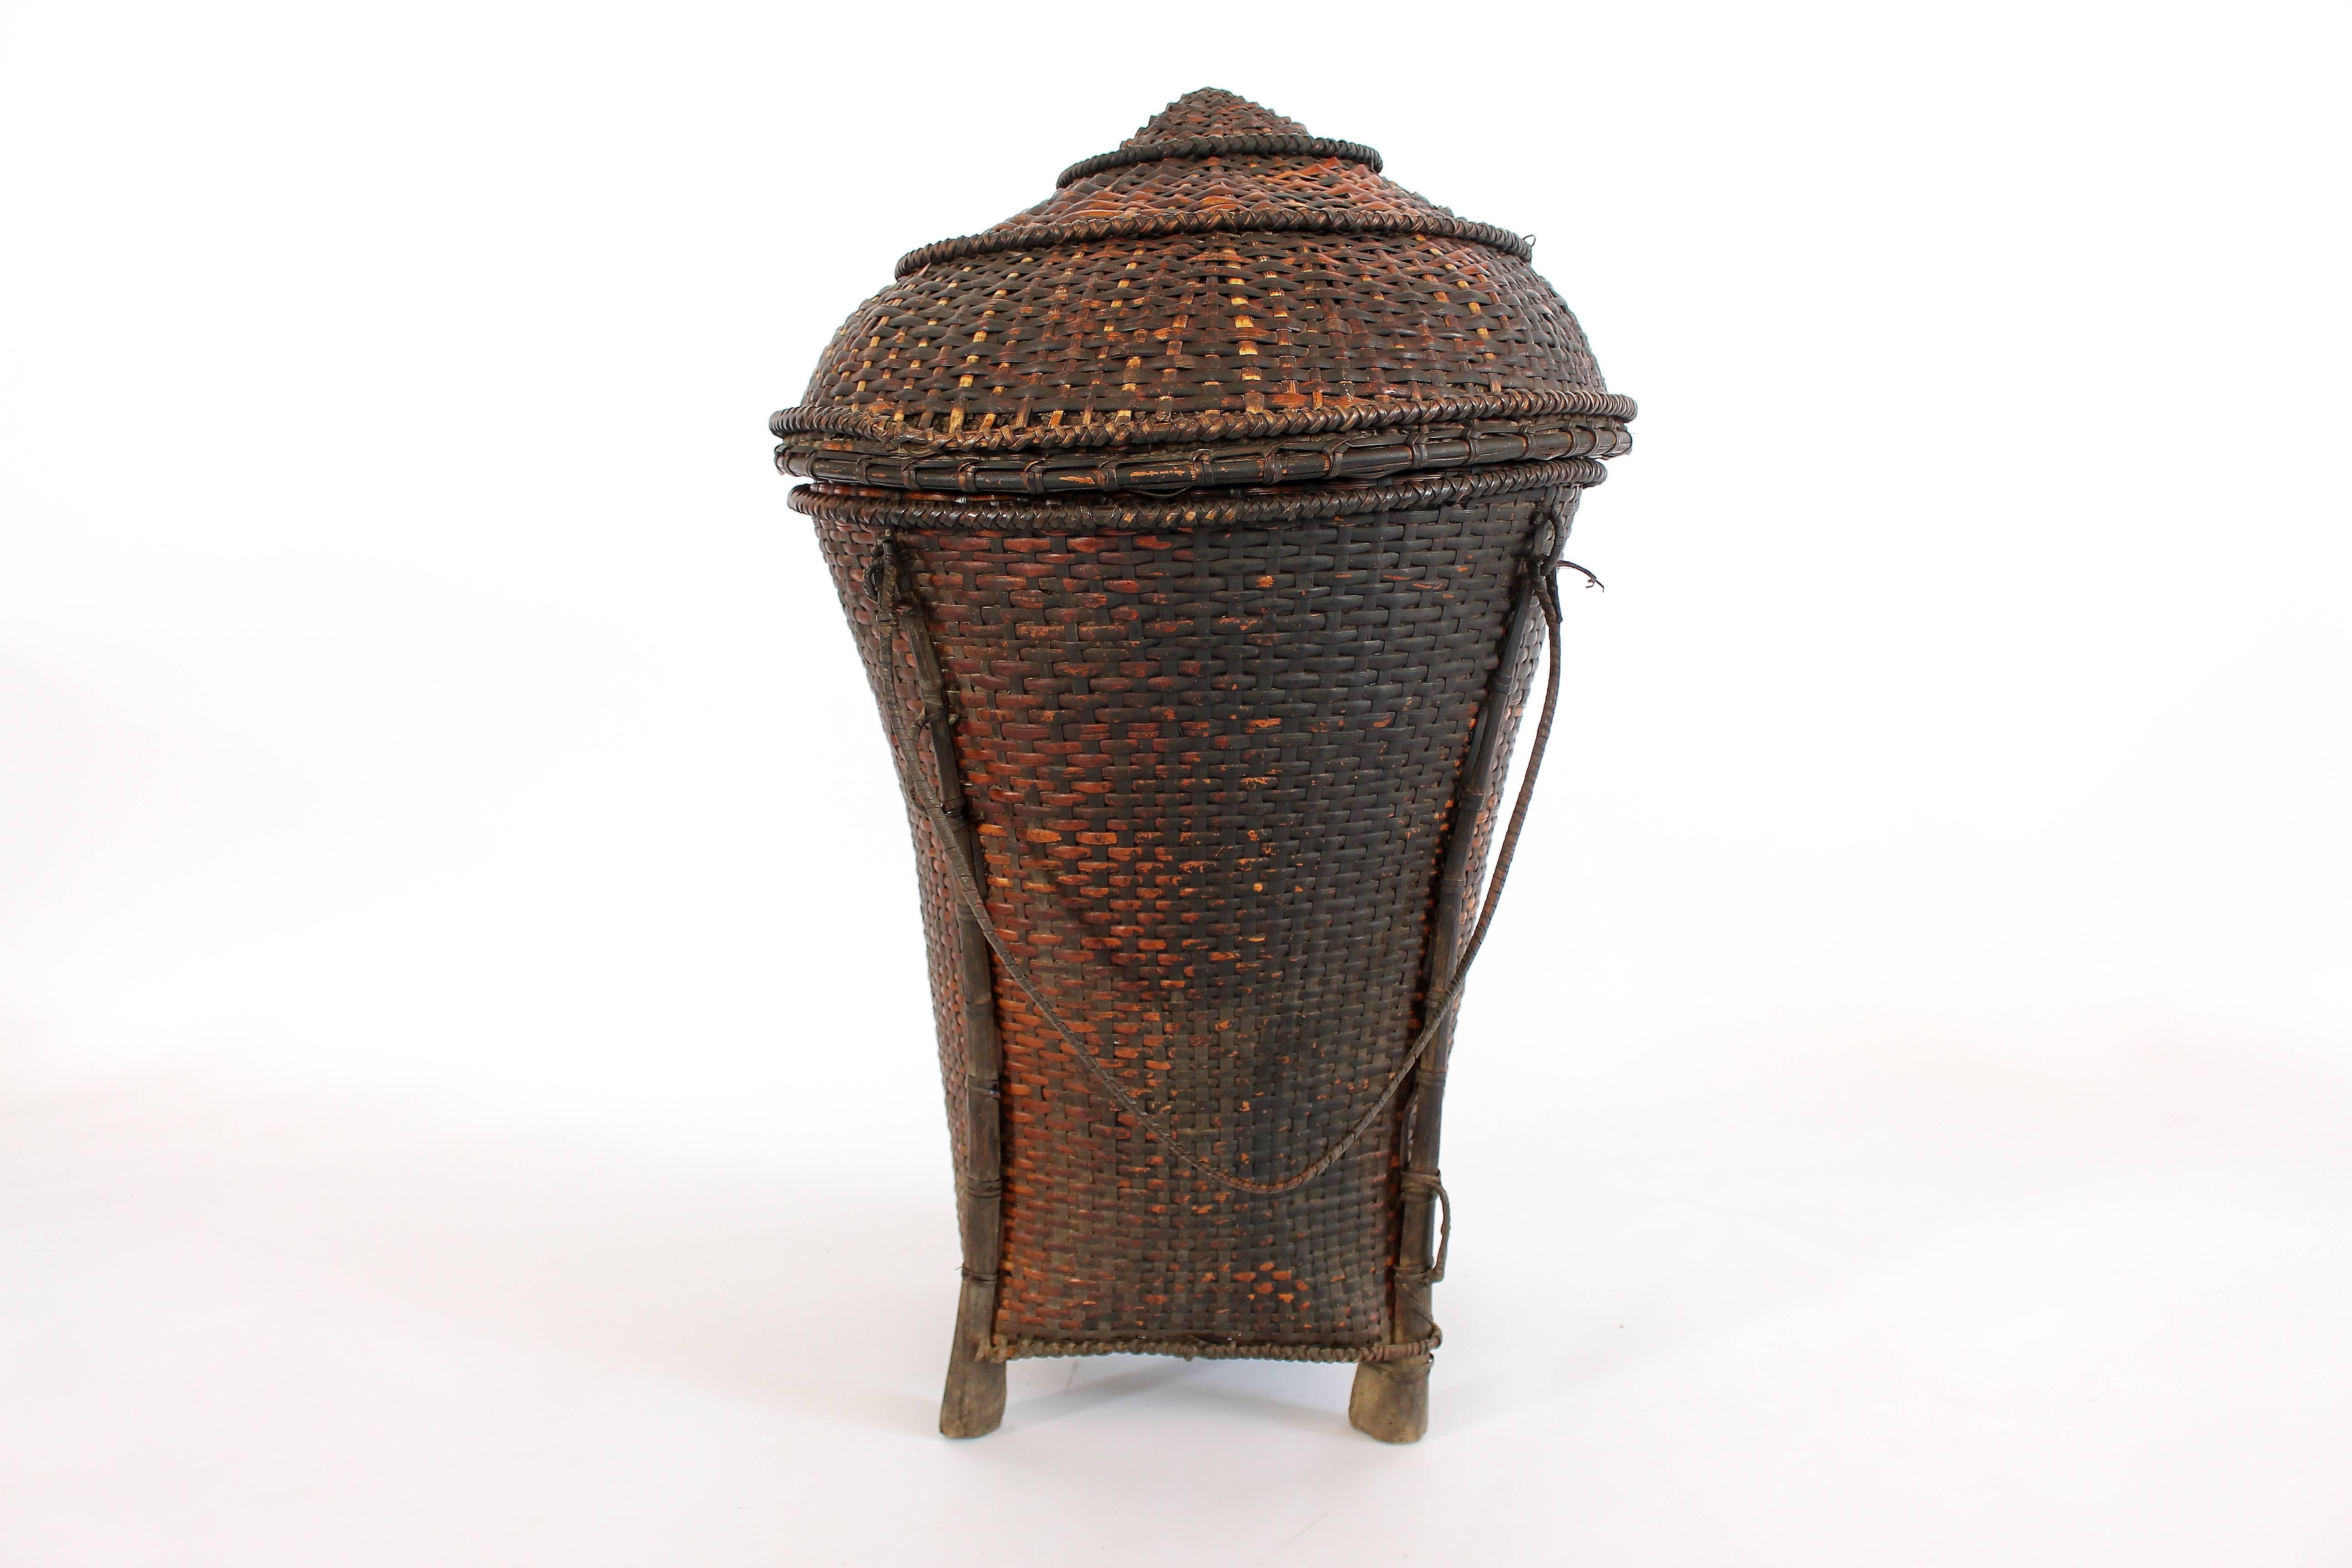 Baskets were used for the transportation and storage of foodstuffs. Baskets like this, with lids and short feet were kept indoors to store rice and keep it dry.

Still one of the world’s most isolated societies, the Naga were once enthusiastic